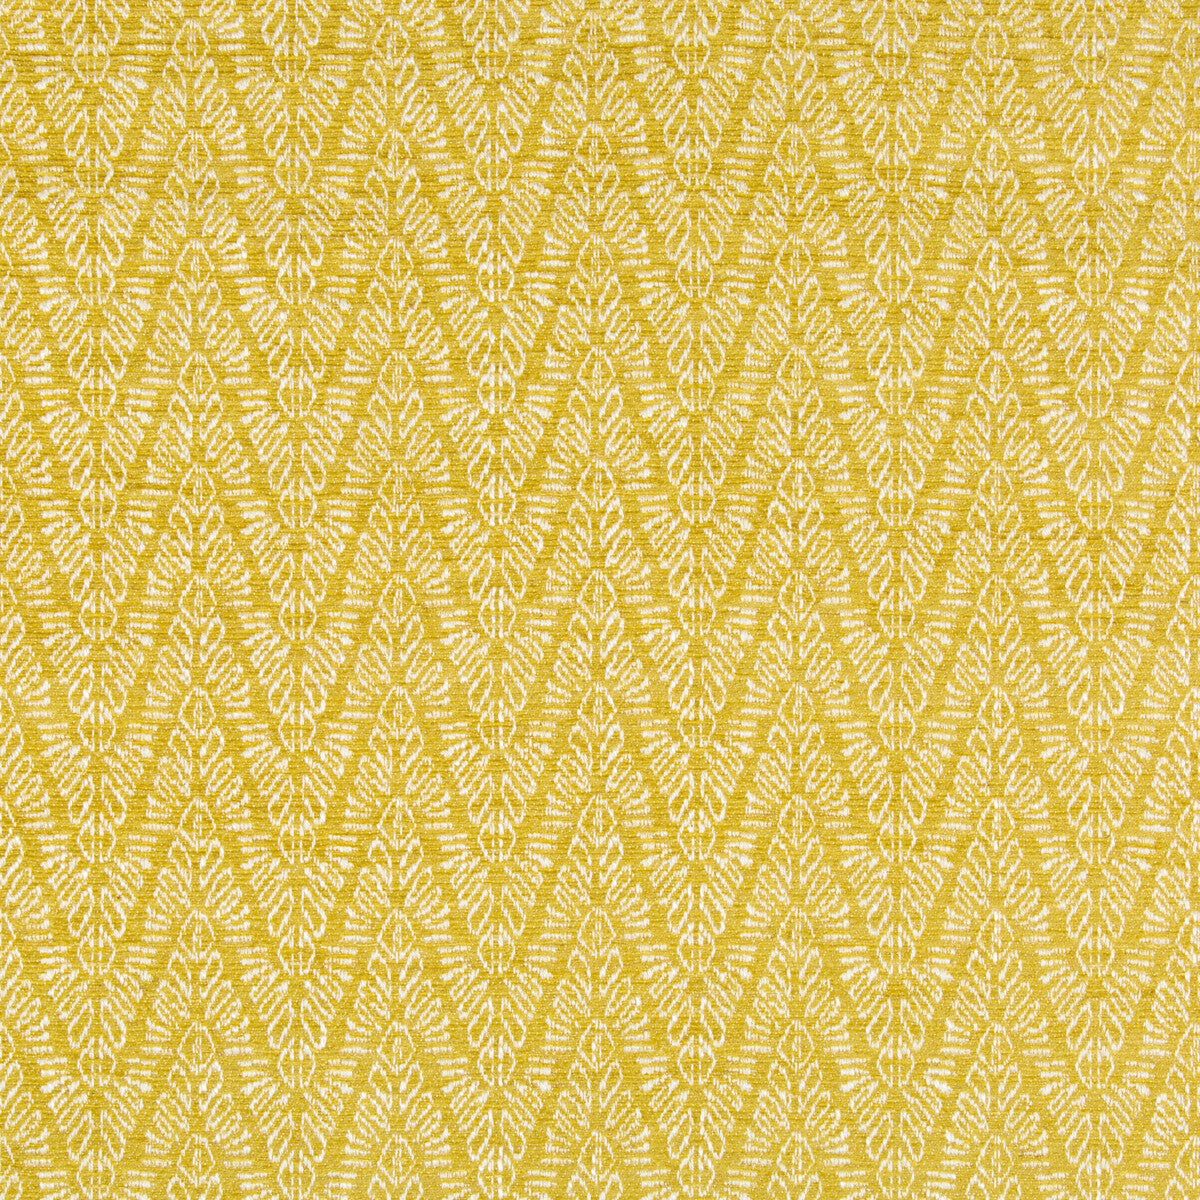 Topaz Weave fabric in chartreuse color - pattern GWF-3750.404.0 - by Lee Jofa Modern in the Gems collection